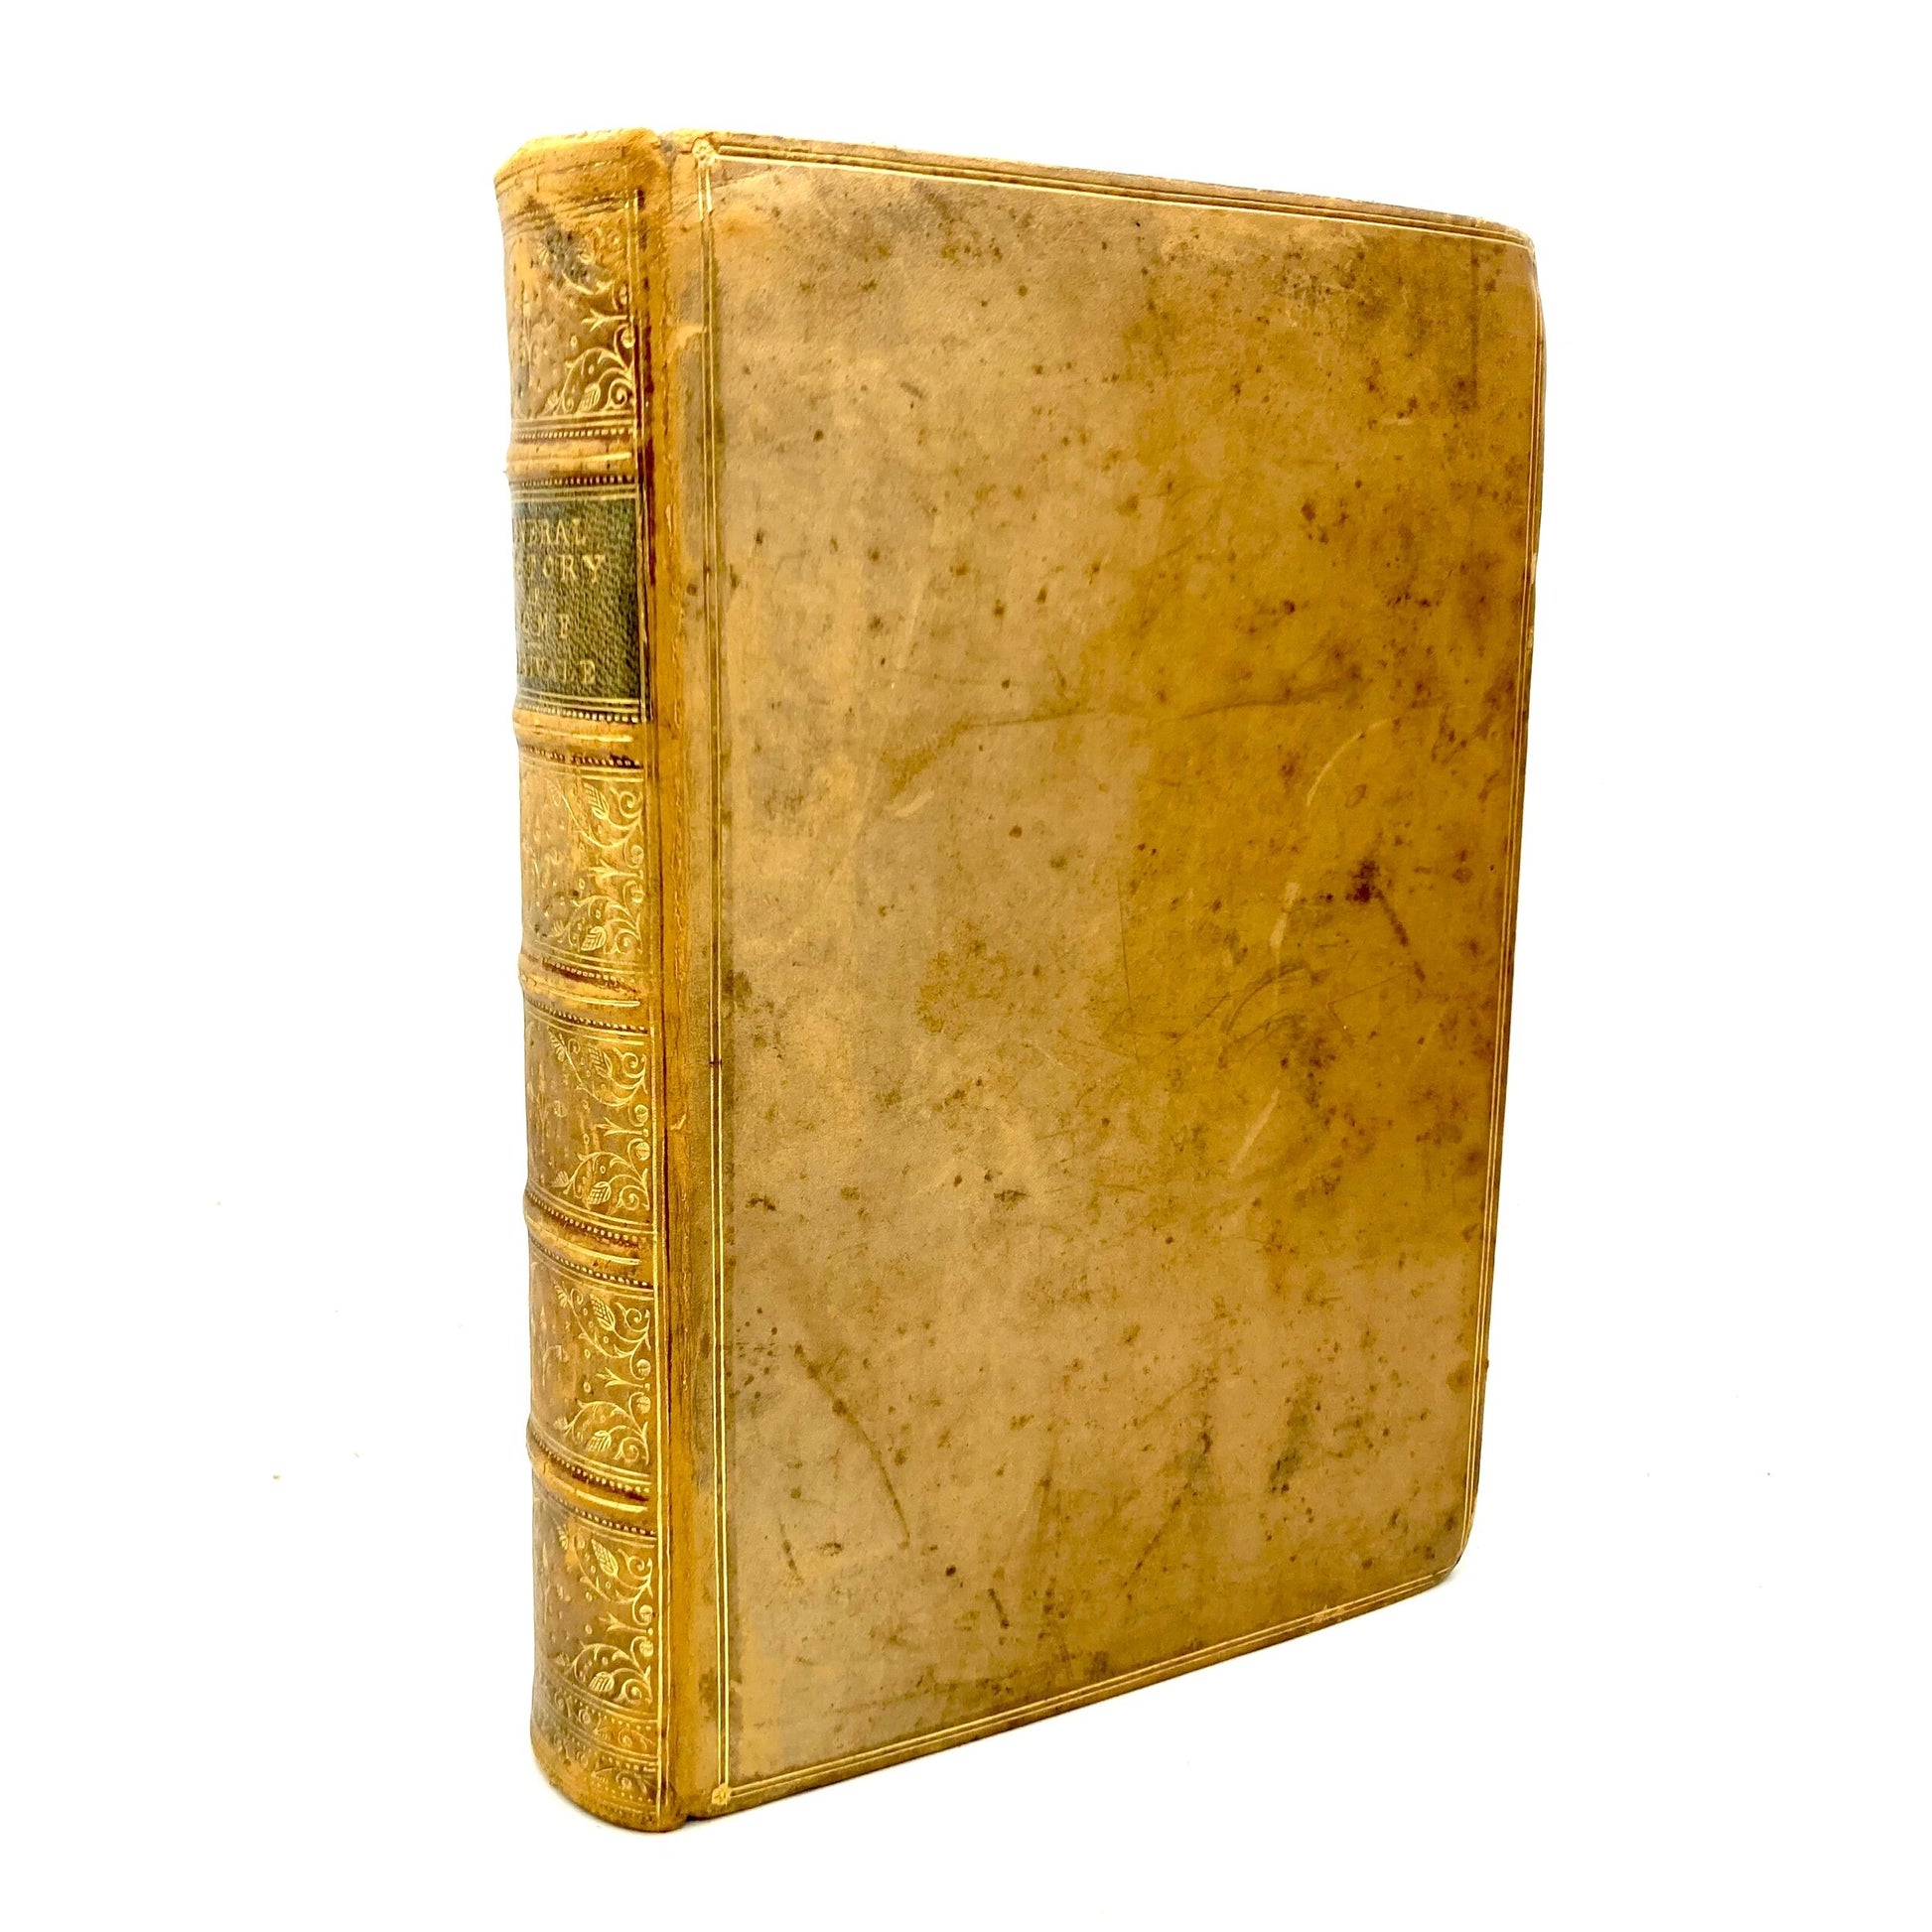 MERIVALE, Charles "A General History of Rome"[Longmans, Green & Co, 1875] - Buzz Bookstore